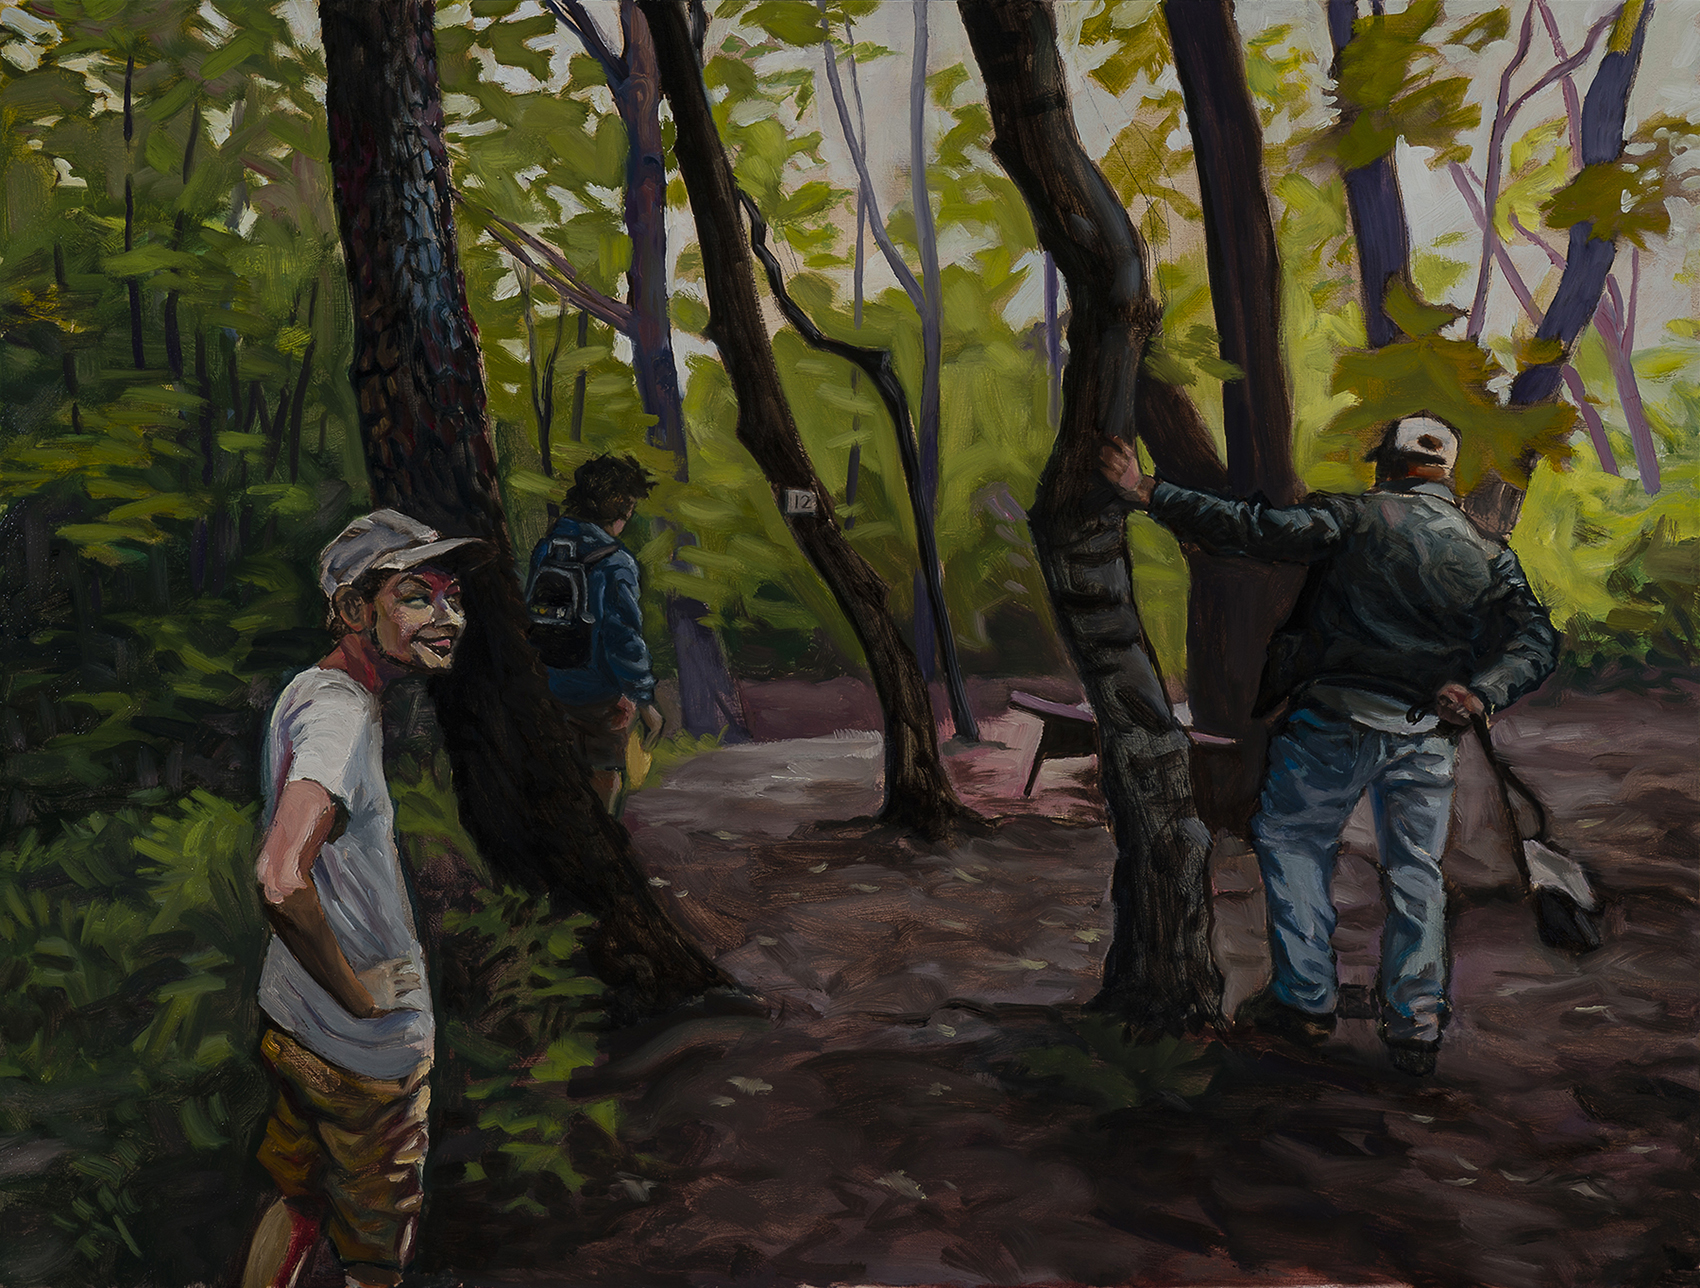 A painting of a group of people in the woods.